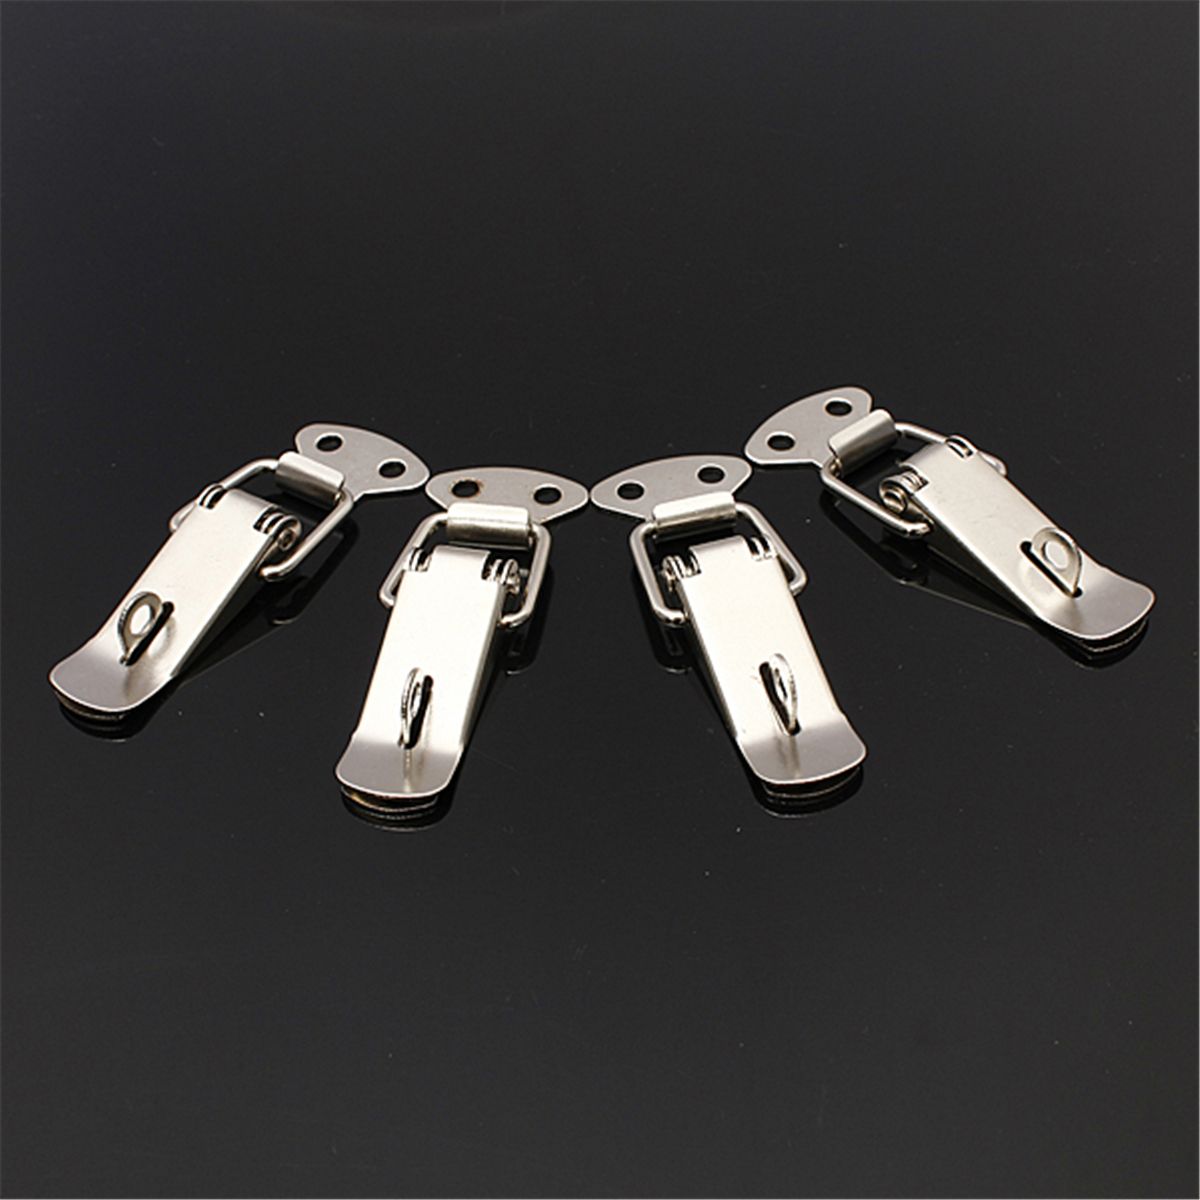 4PCS-Case-Box-Chest-Spring-Stainless-Tone-Lock-Toggle-Latch-Catch-Clasp-948011